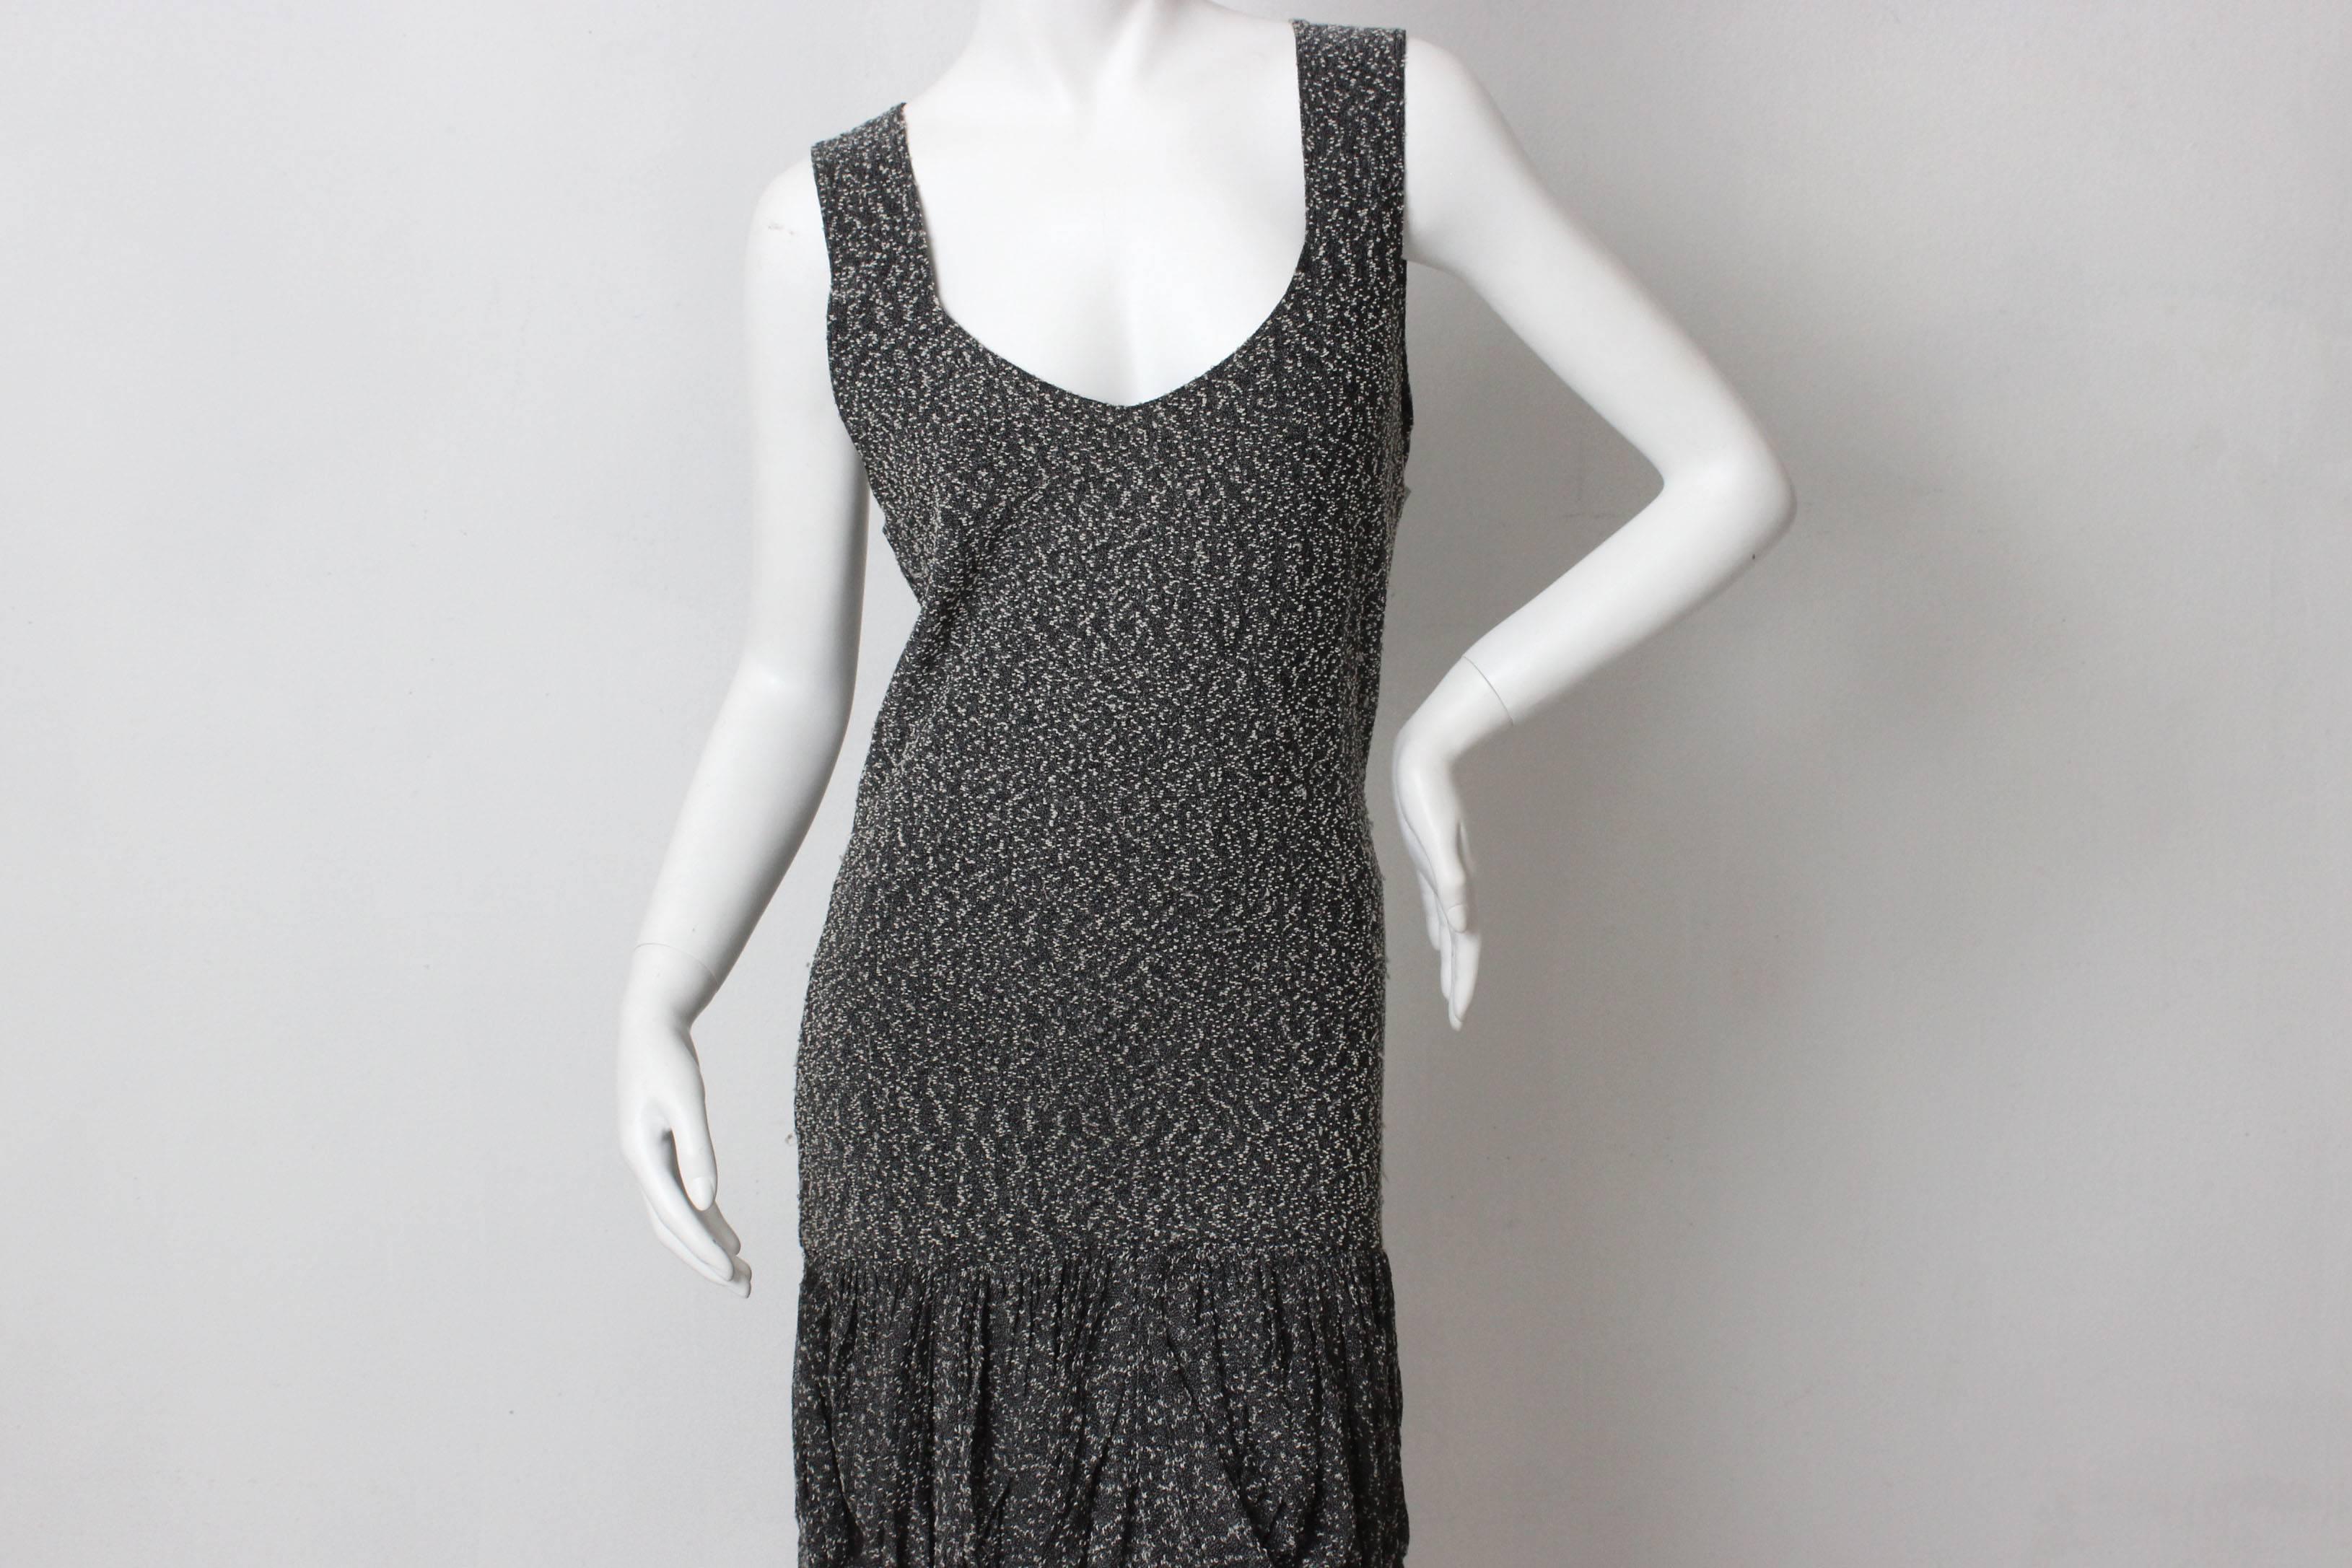  This dress is a departure from the well known Missoni knit patterns. The body hugging shape is made a sophisticated grey and black boucle. It has a low neckline and is fitted past the hips.  The fabric is gathered into beautiful draping  at the